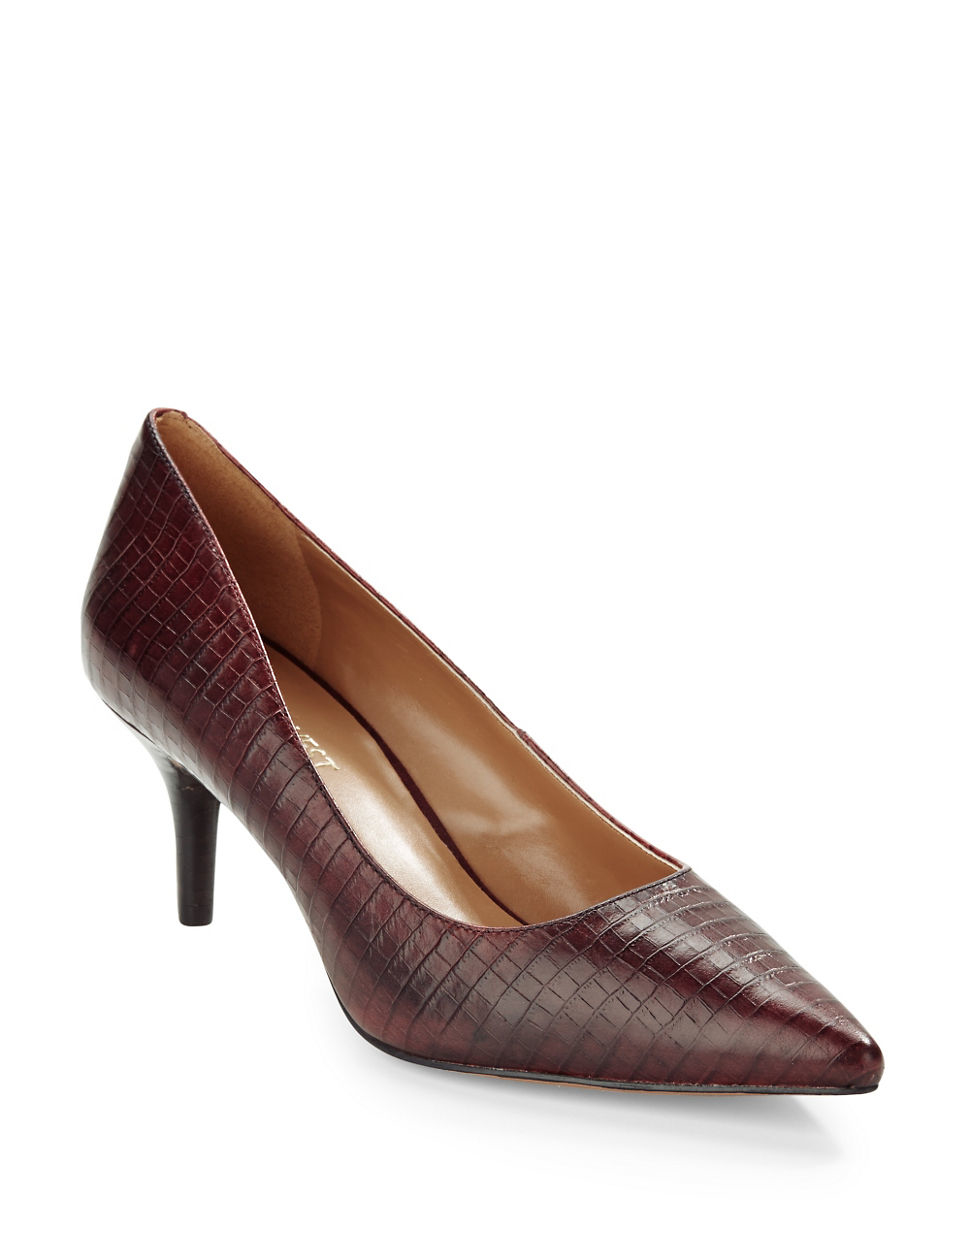 Lyst - Nine West Margot Crocodile Embossed Leather Pumps in Red